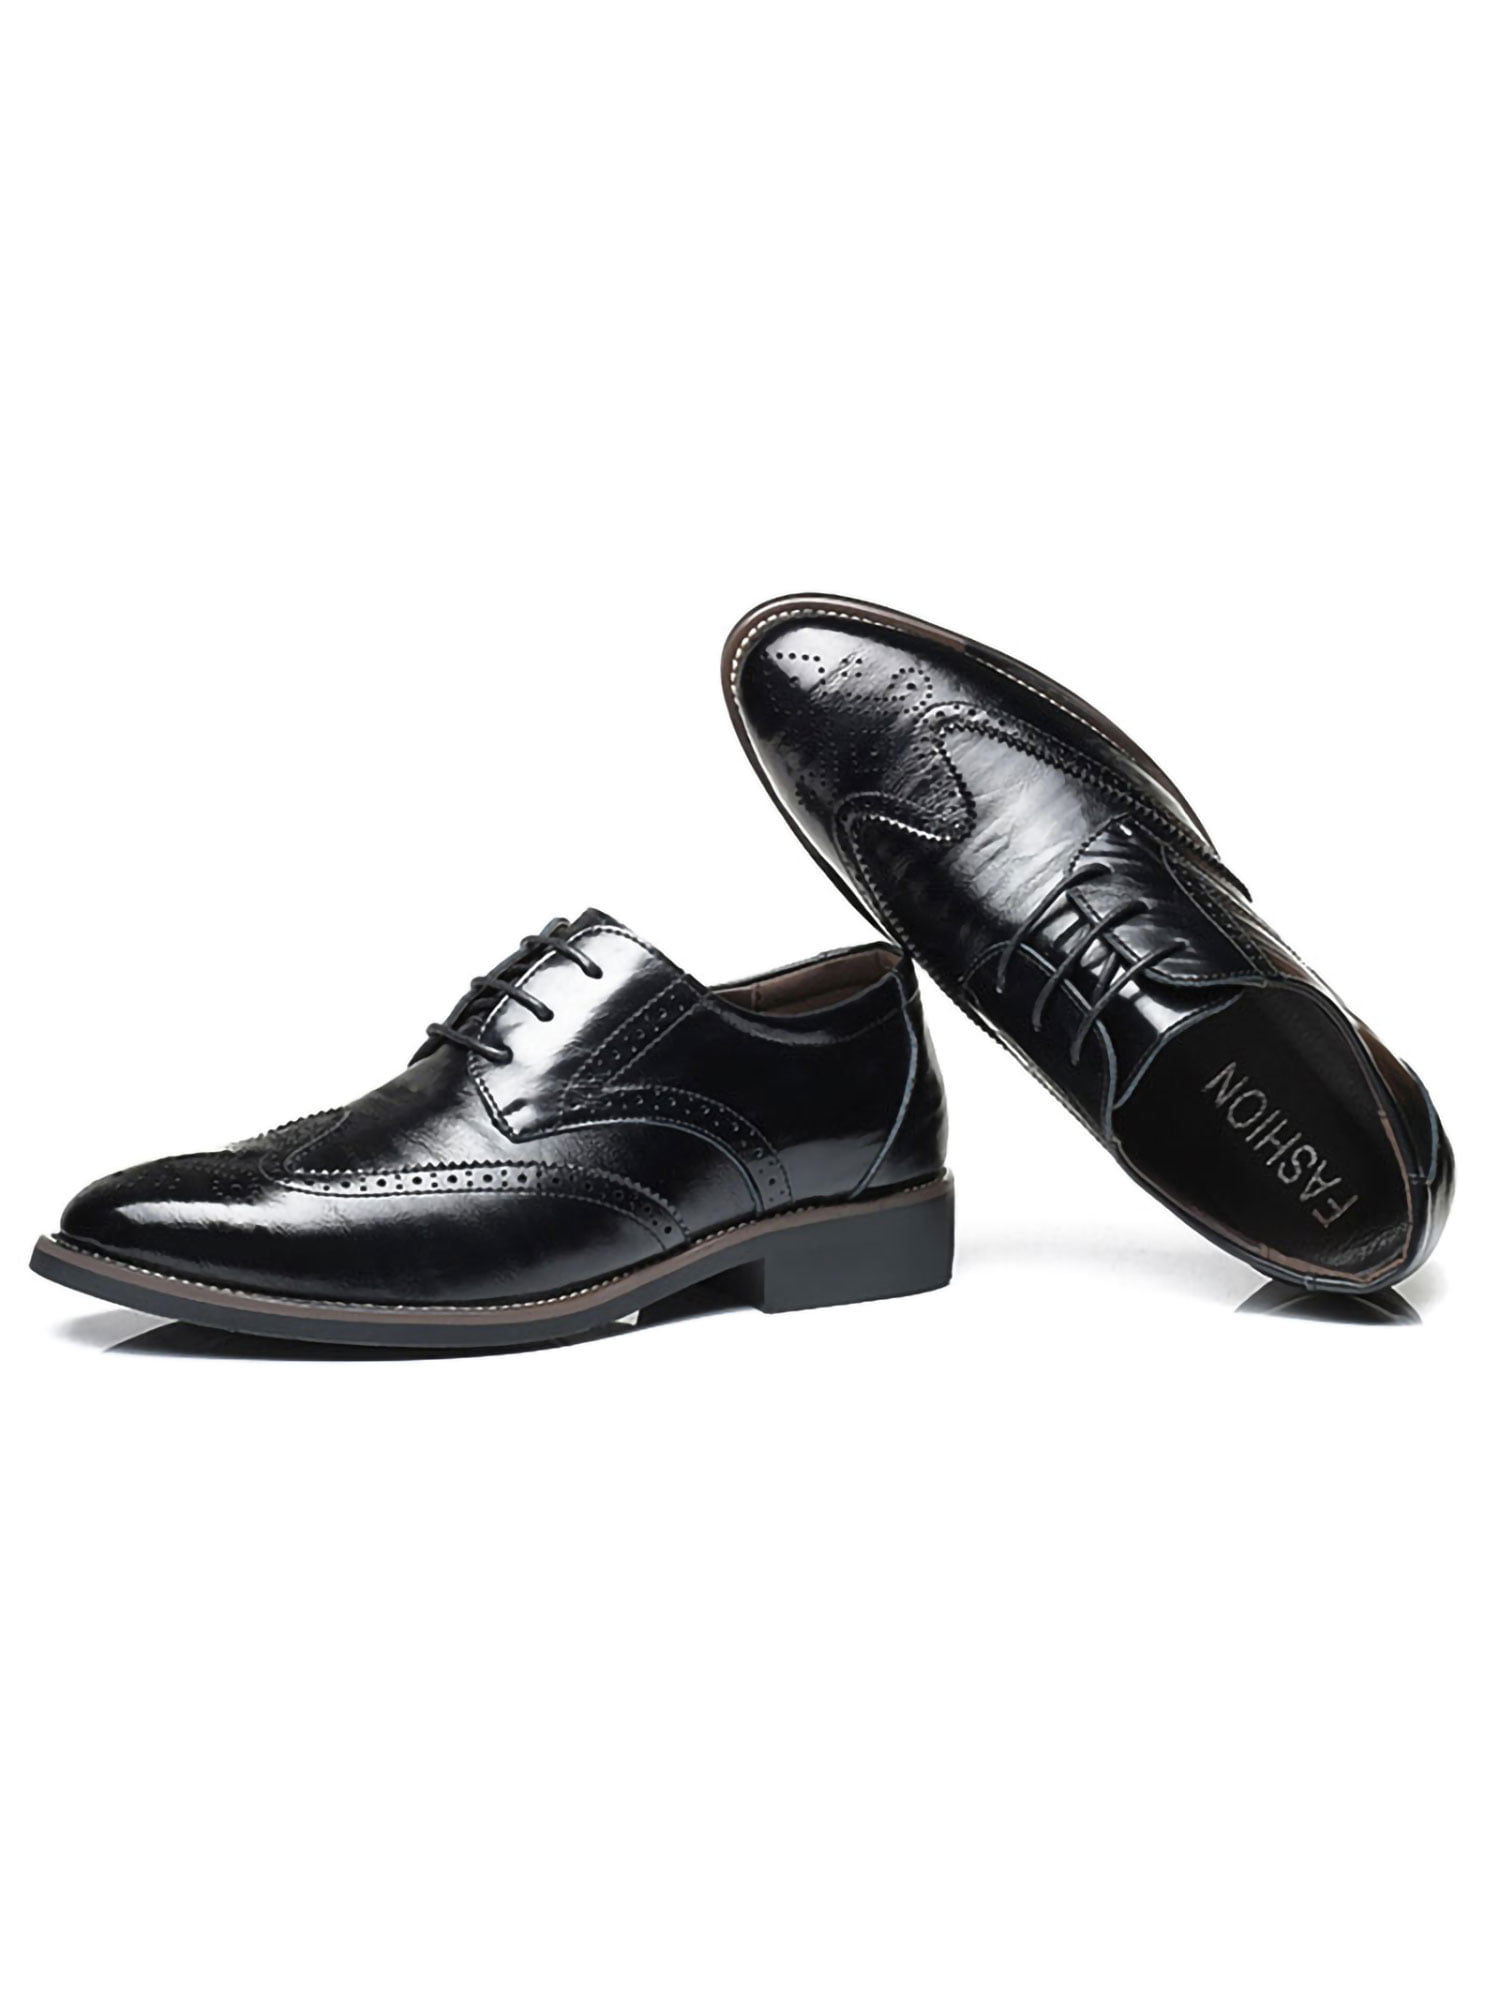 Details about   Mens Low Top Business Leisure Shoes Pointy Toe Dress Formal Work Party Oxfords 